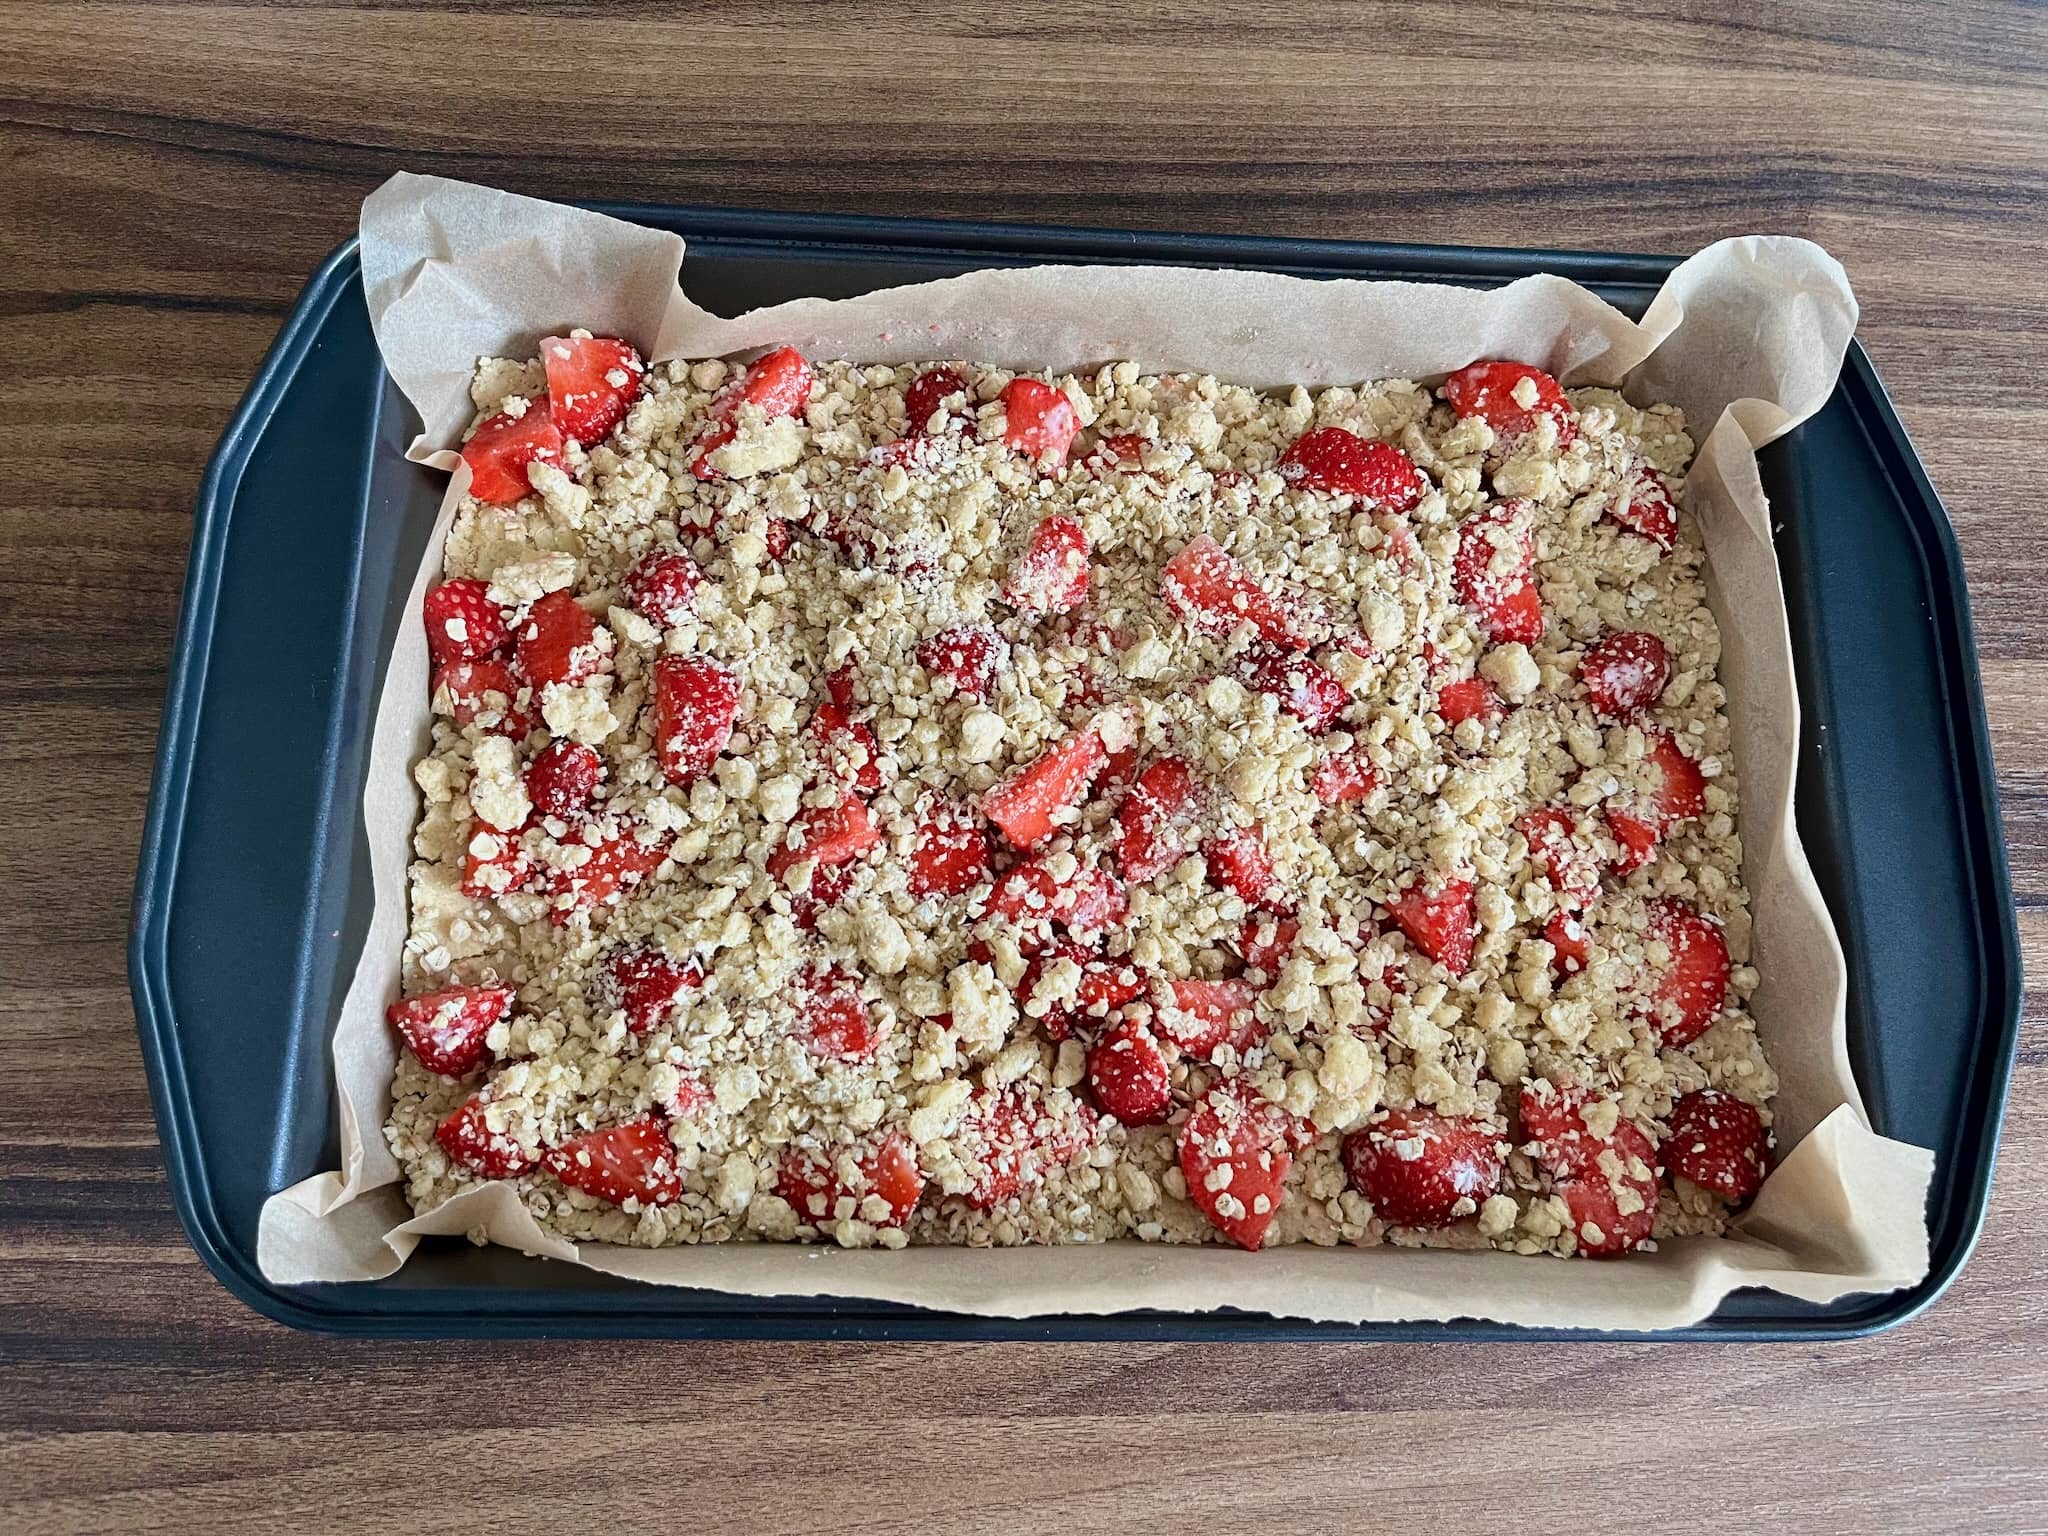 Strawberries on top of flattened dough covered with crumbled dough